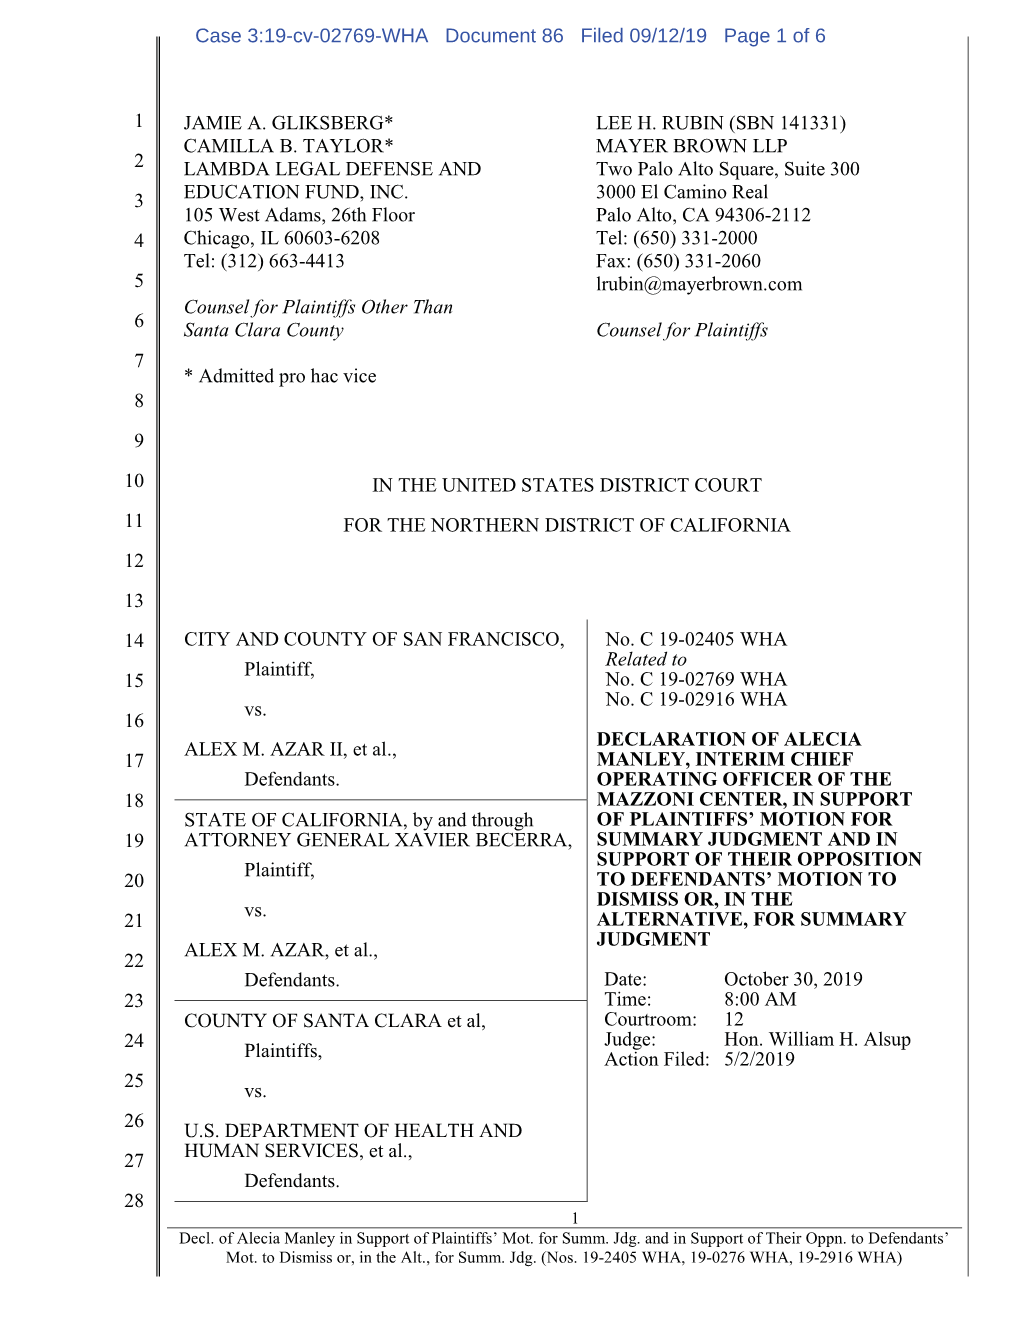 Case 3:19-Cv-02769-WHA Document 86 Filed 09/12/19 Page 1 of 6